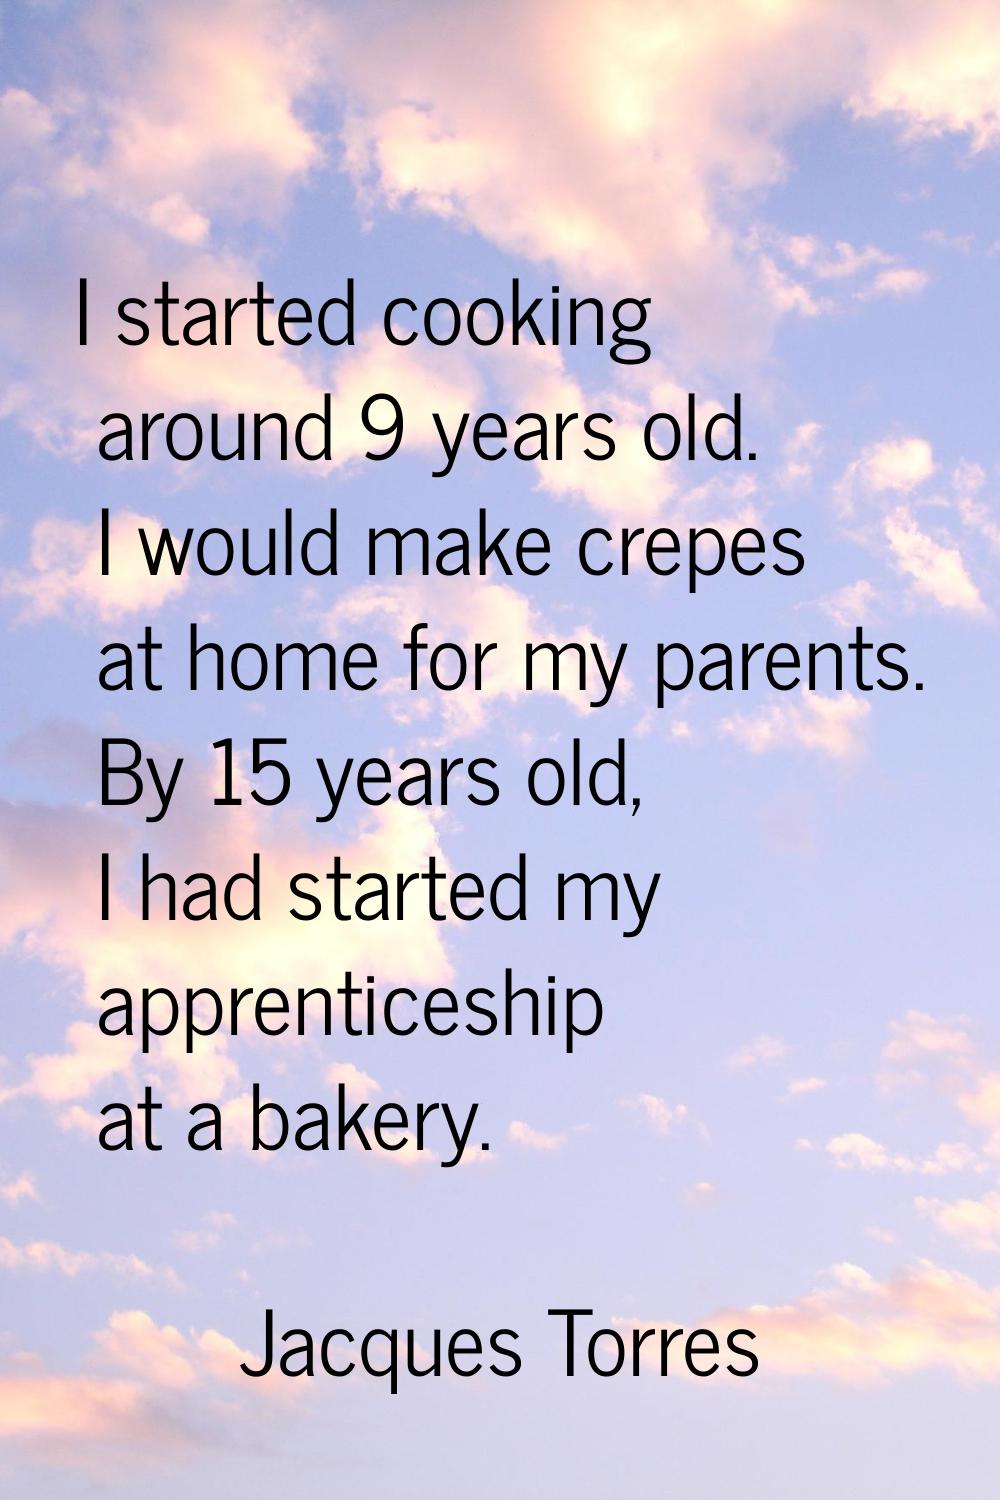 I started cooking around 9 years old. I would make crepes at home for my parents. By 15 years old, 